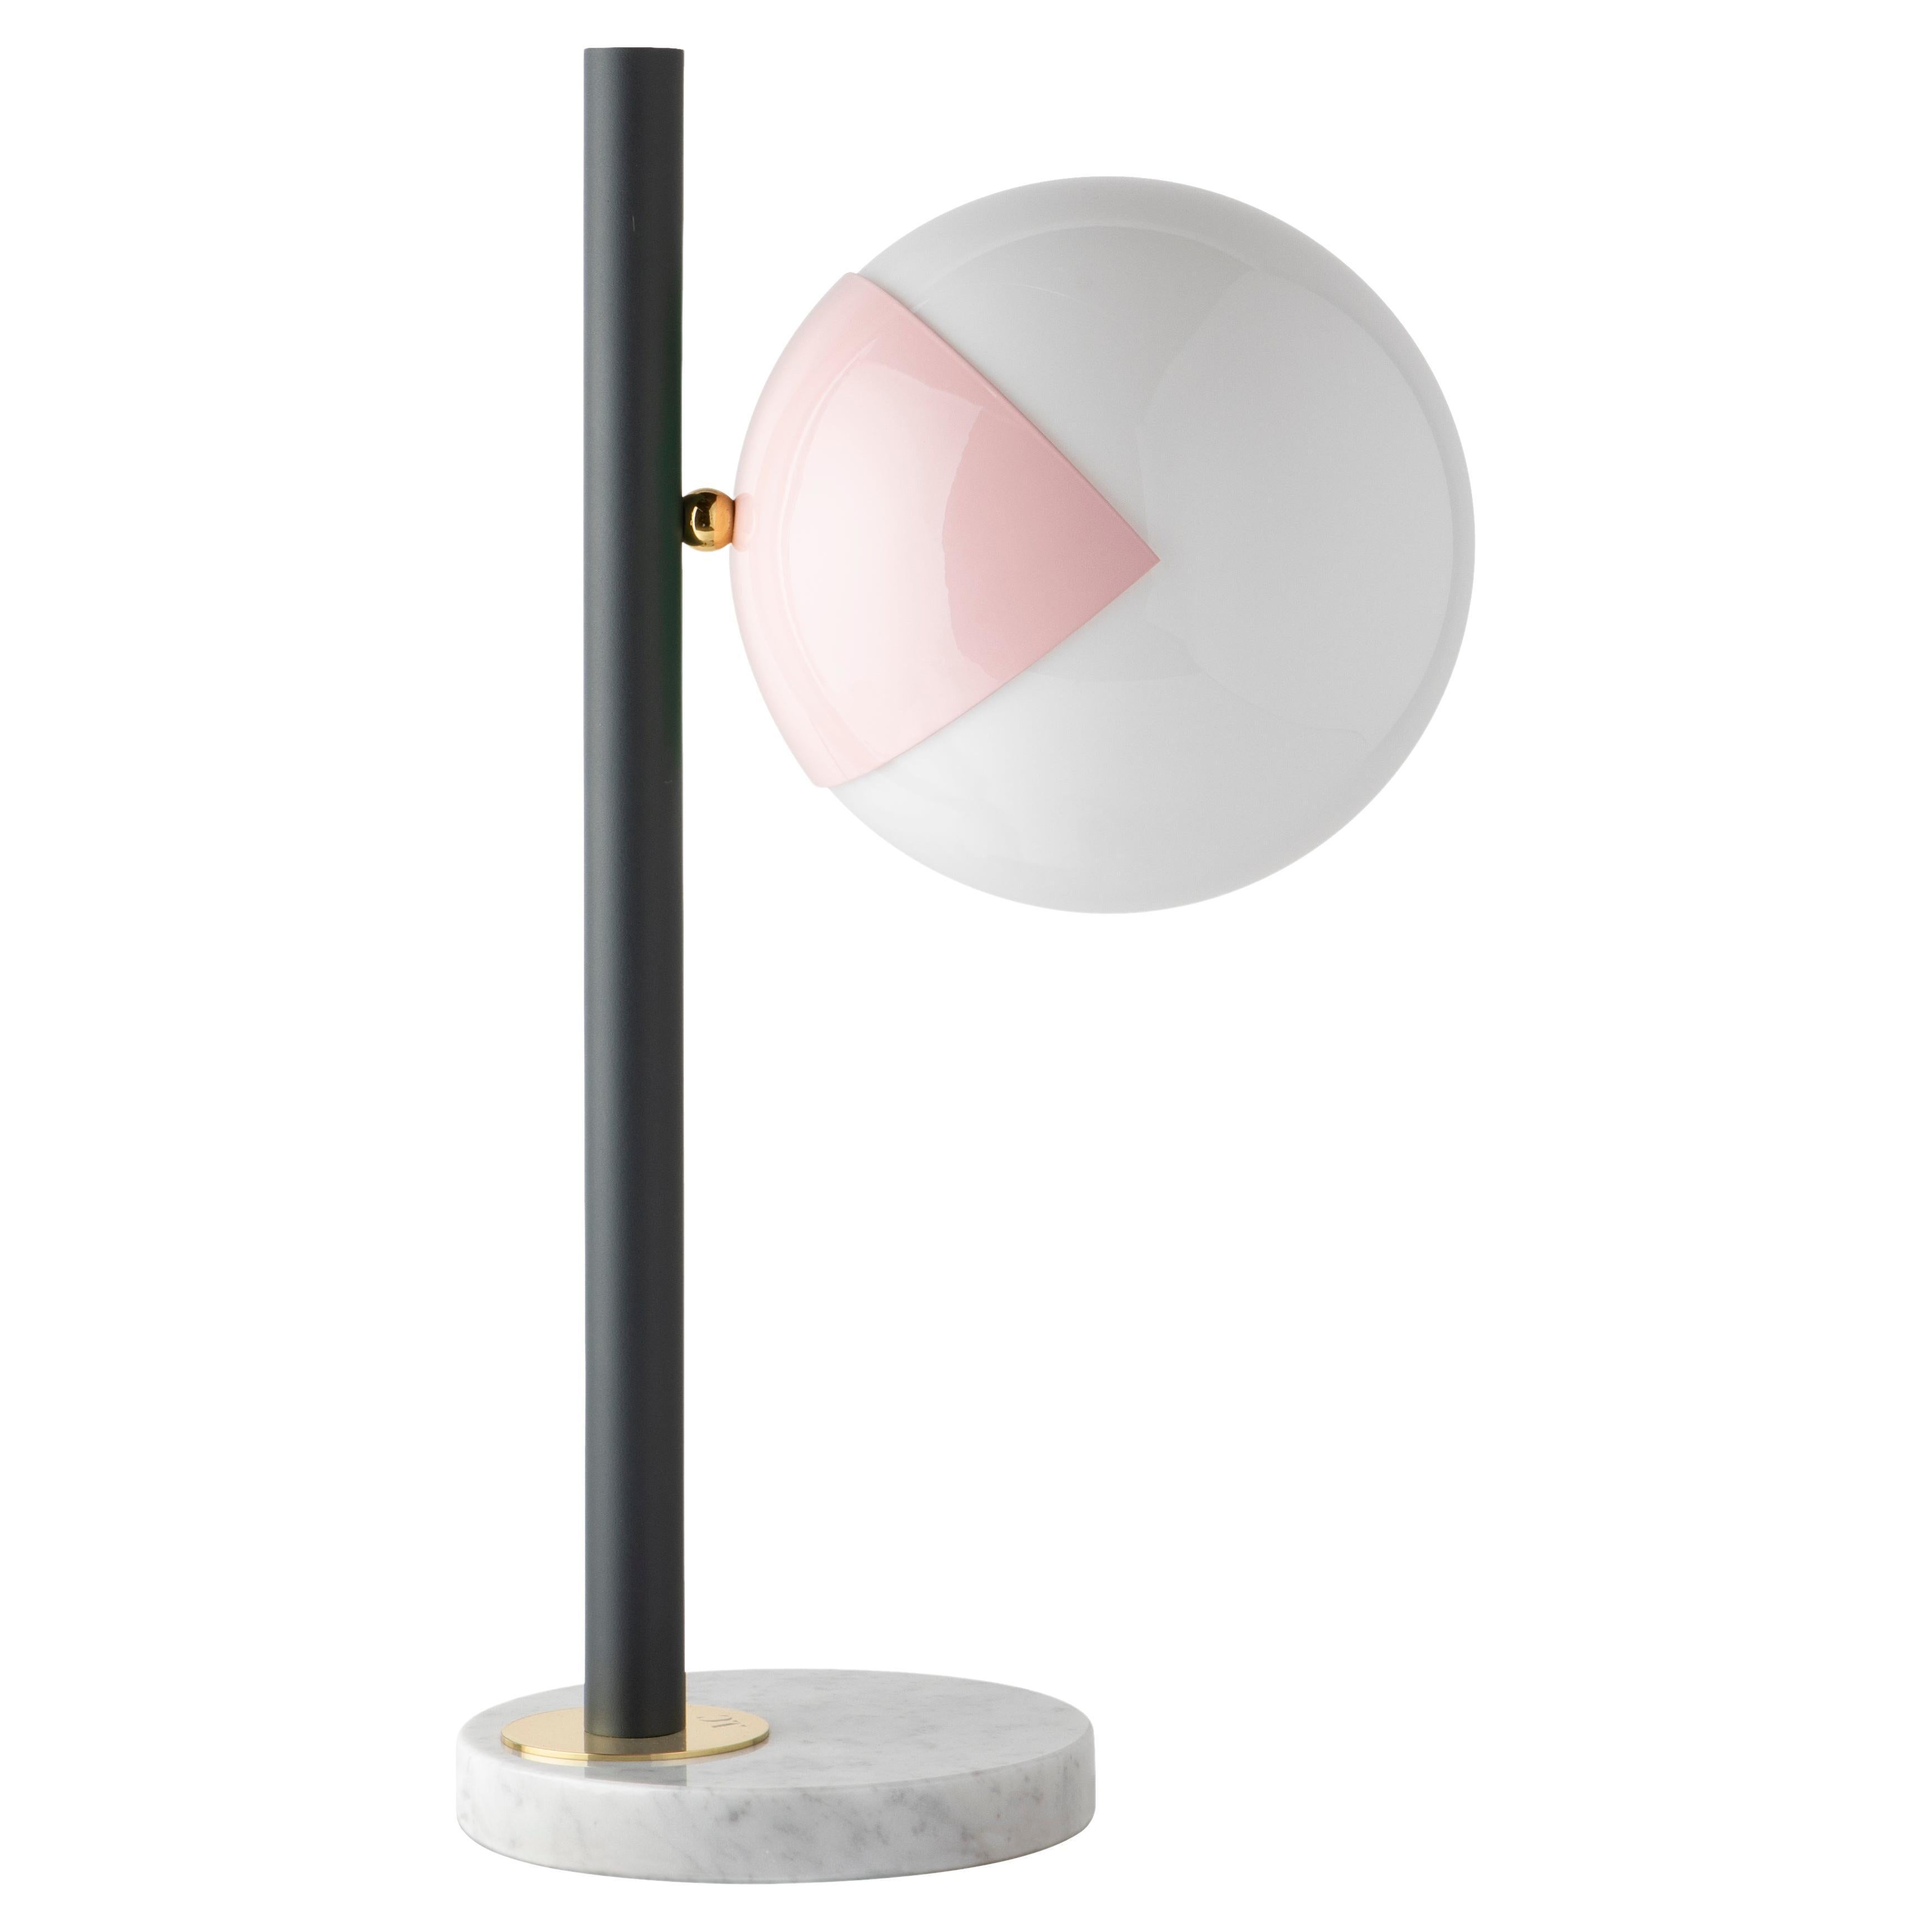 Blue dimmable table lamp pop-up black by Magic Circus Editions
Dimensions: Ø 22 x 30 x 53 cm 
Materials: carrara marble base, smooth brass tube, glossy mouth blown glass

All our lamps can be wired according to each country. If sold to the USA